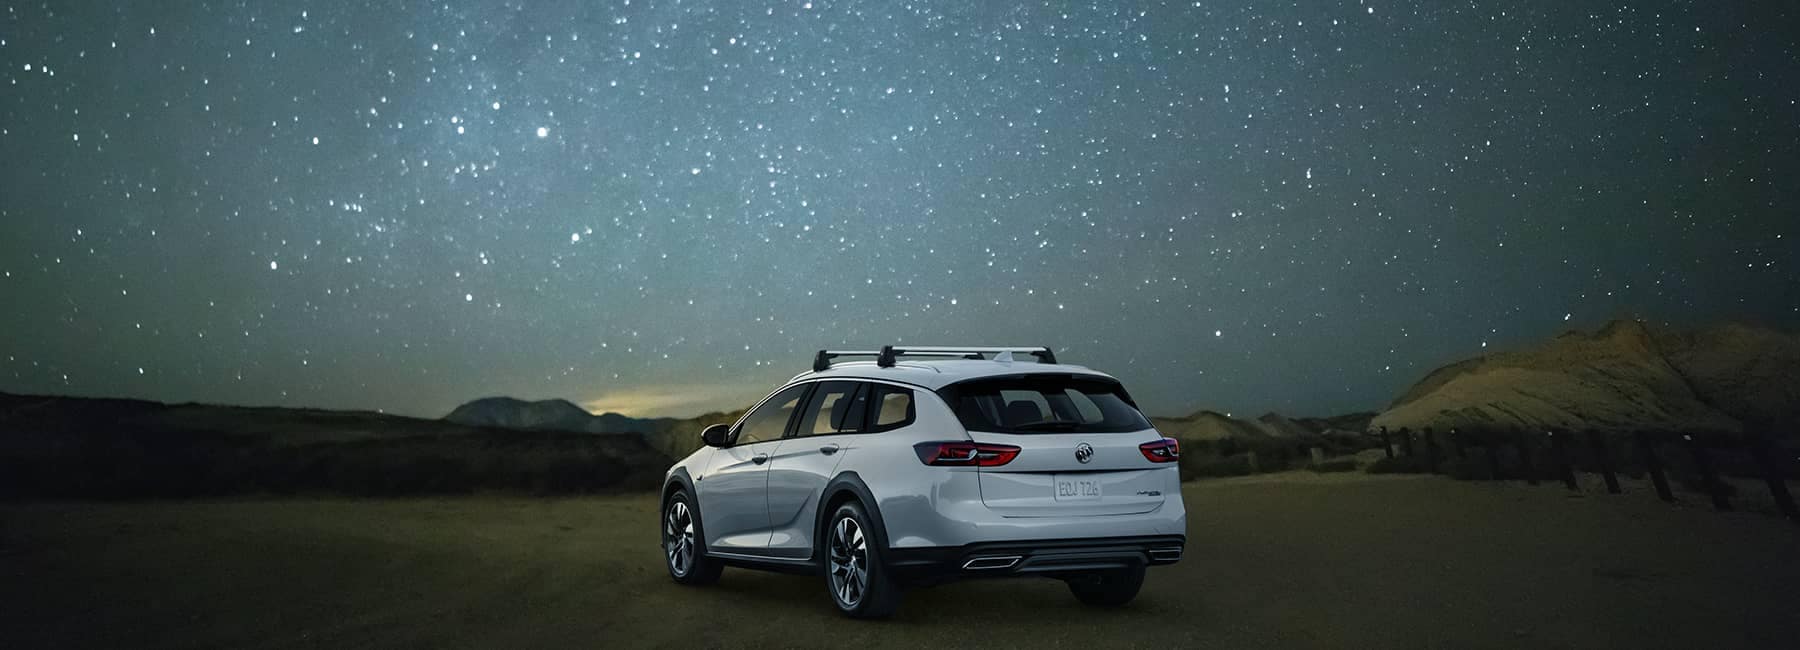 White 2020 Buick Regal TourX under a starry sky